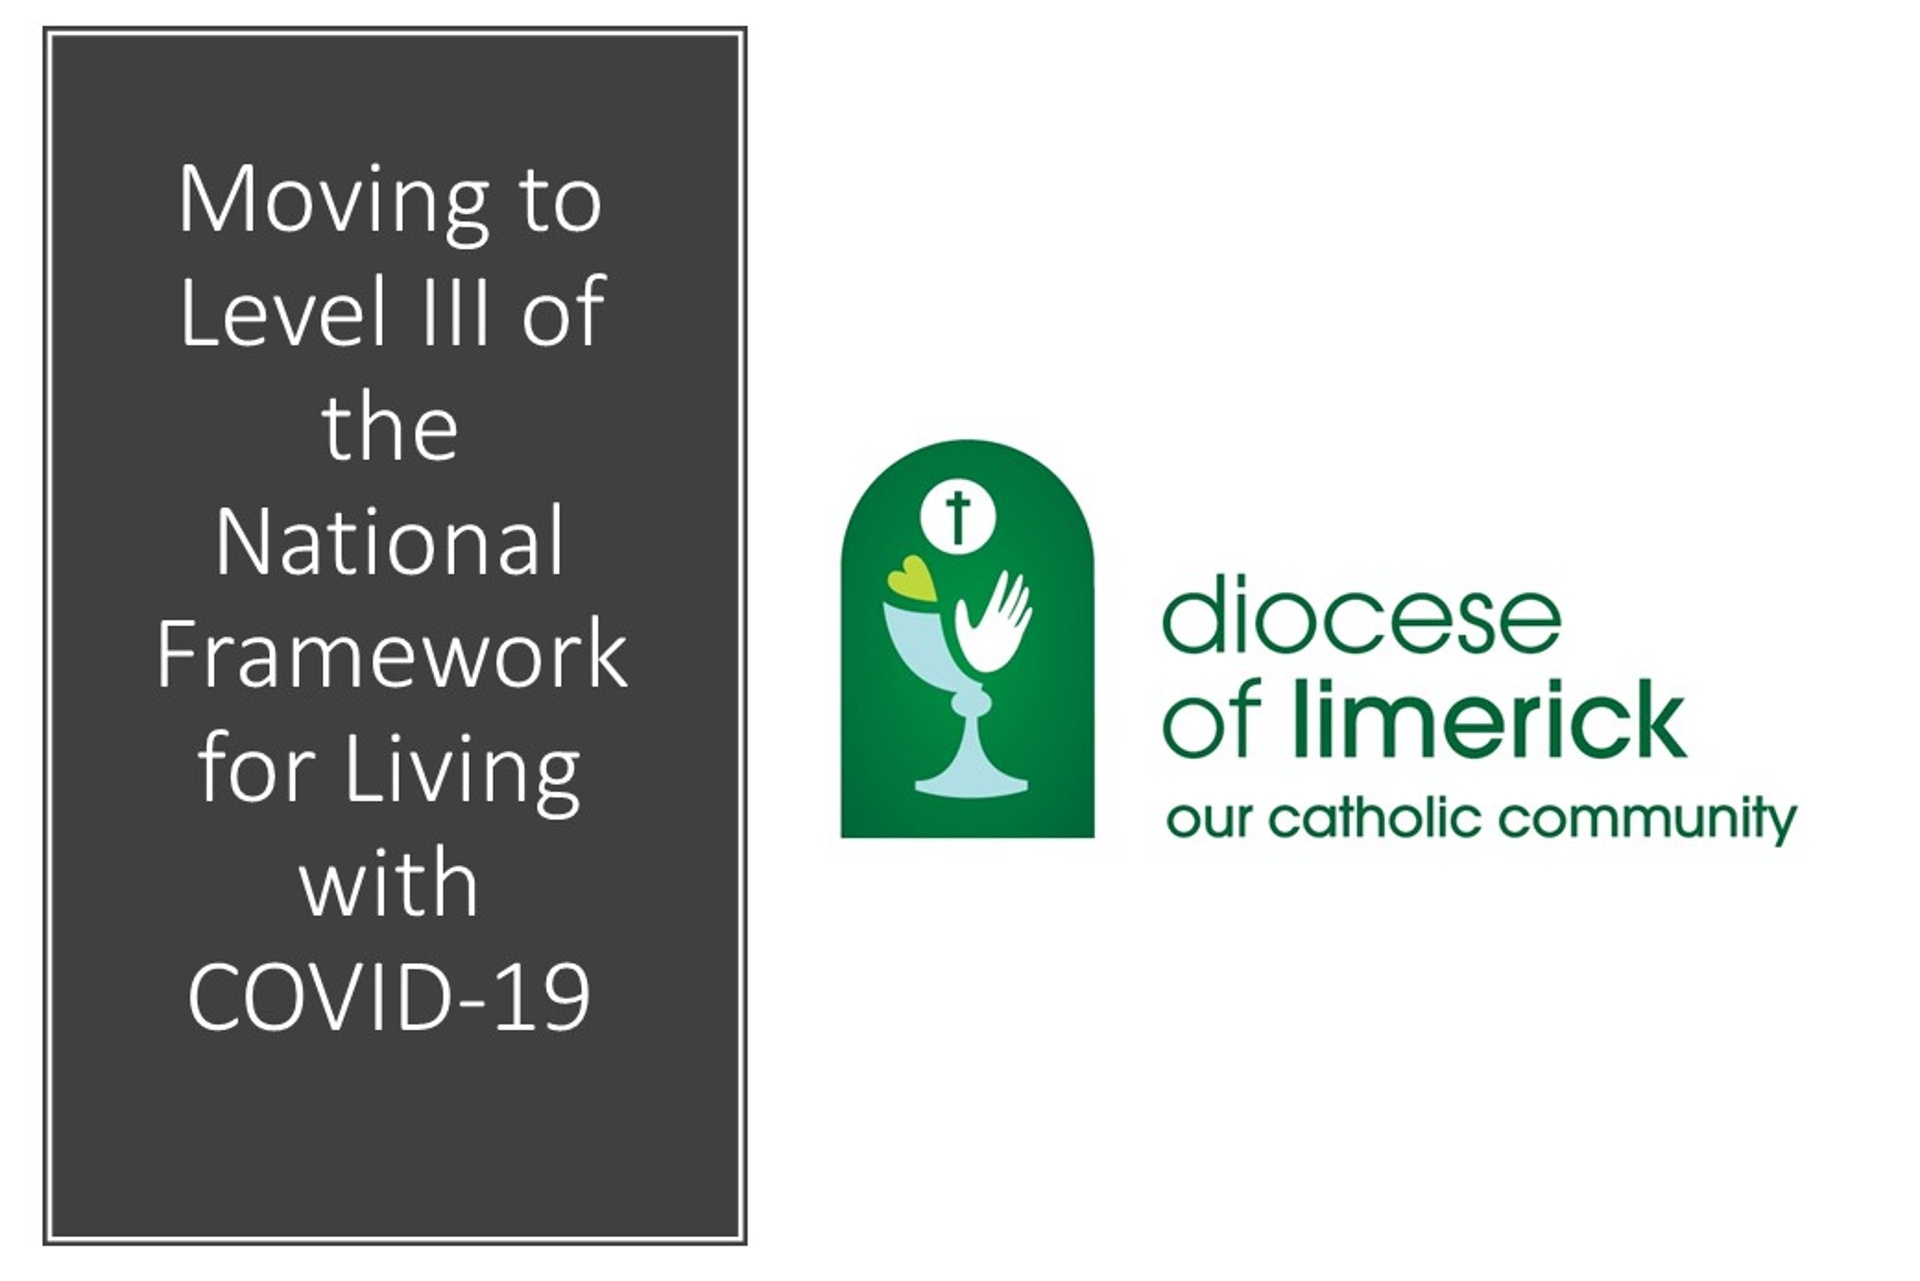 Moving to Level III of the National Framework for living with COVID-19